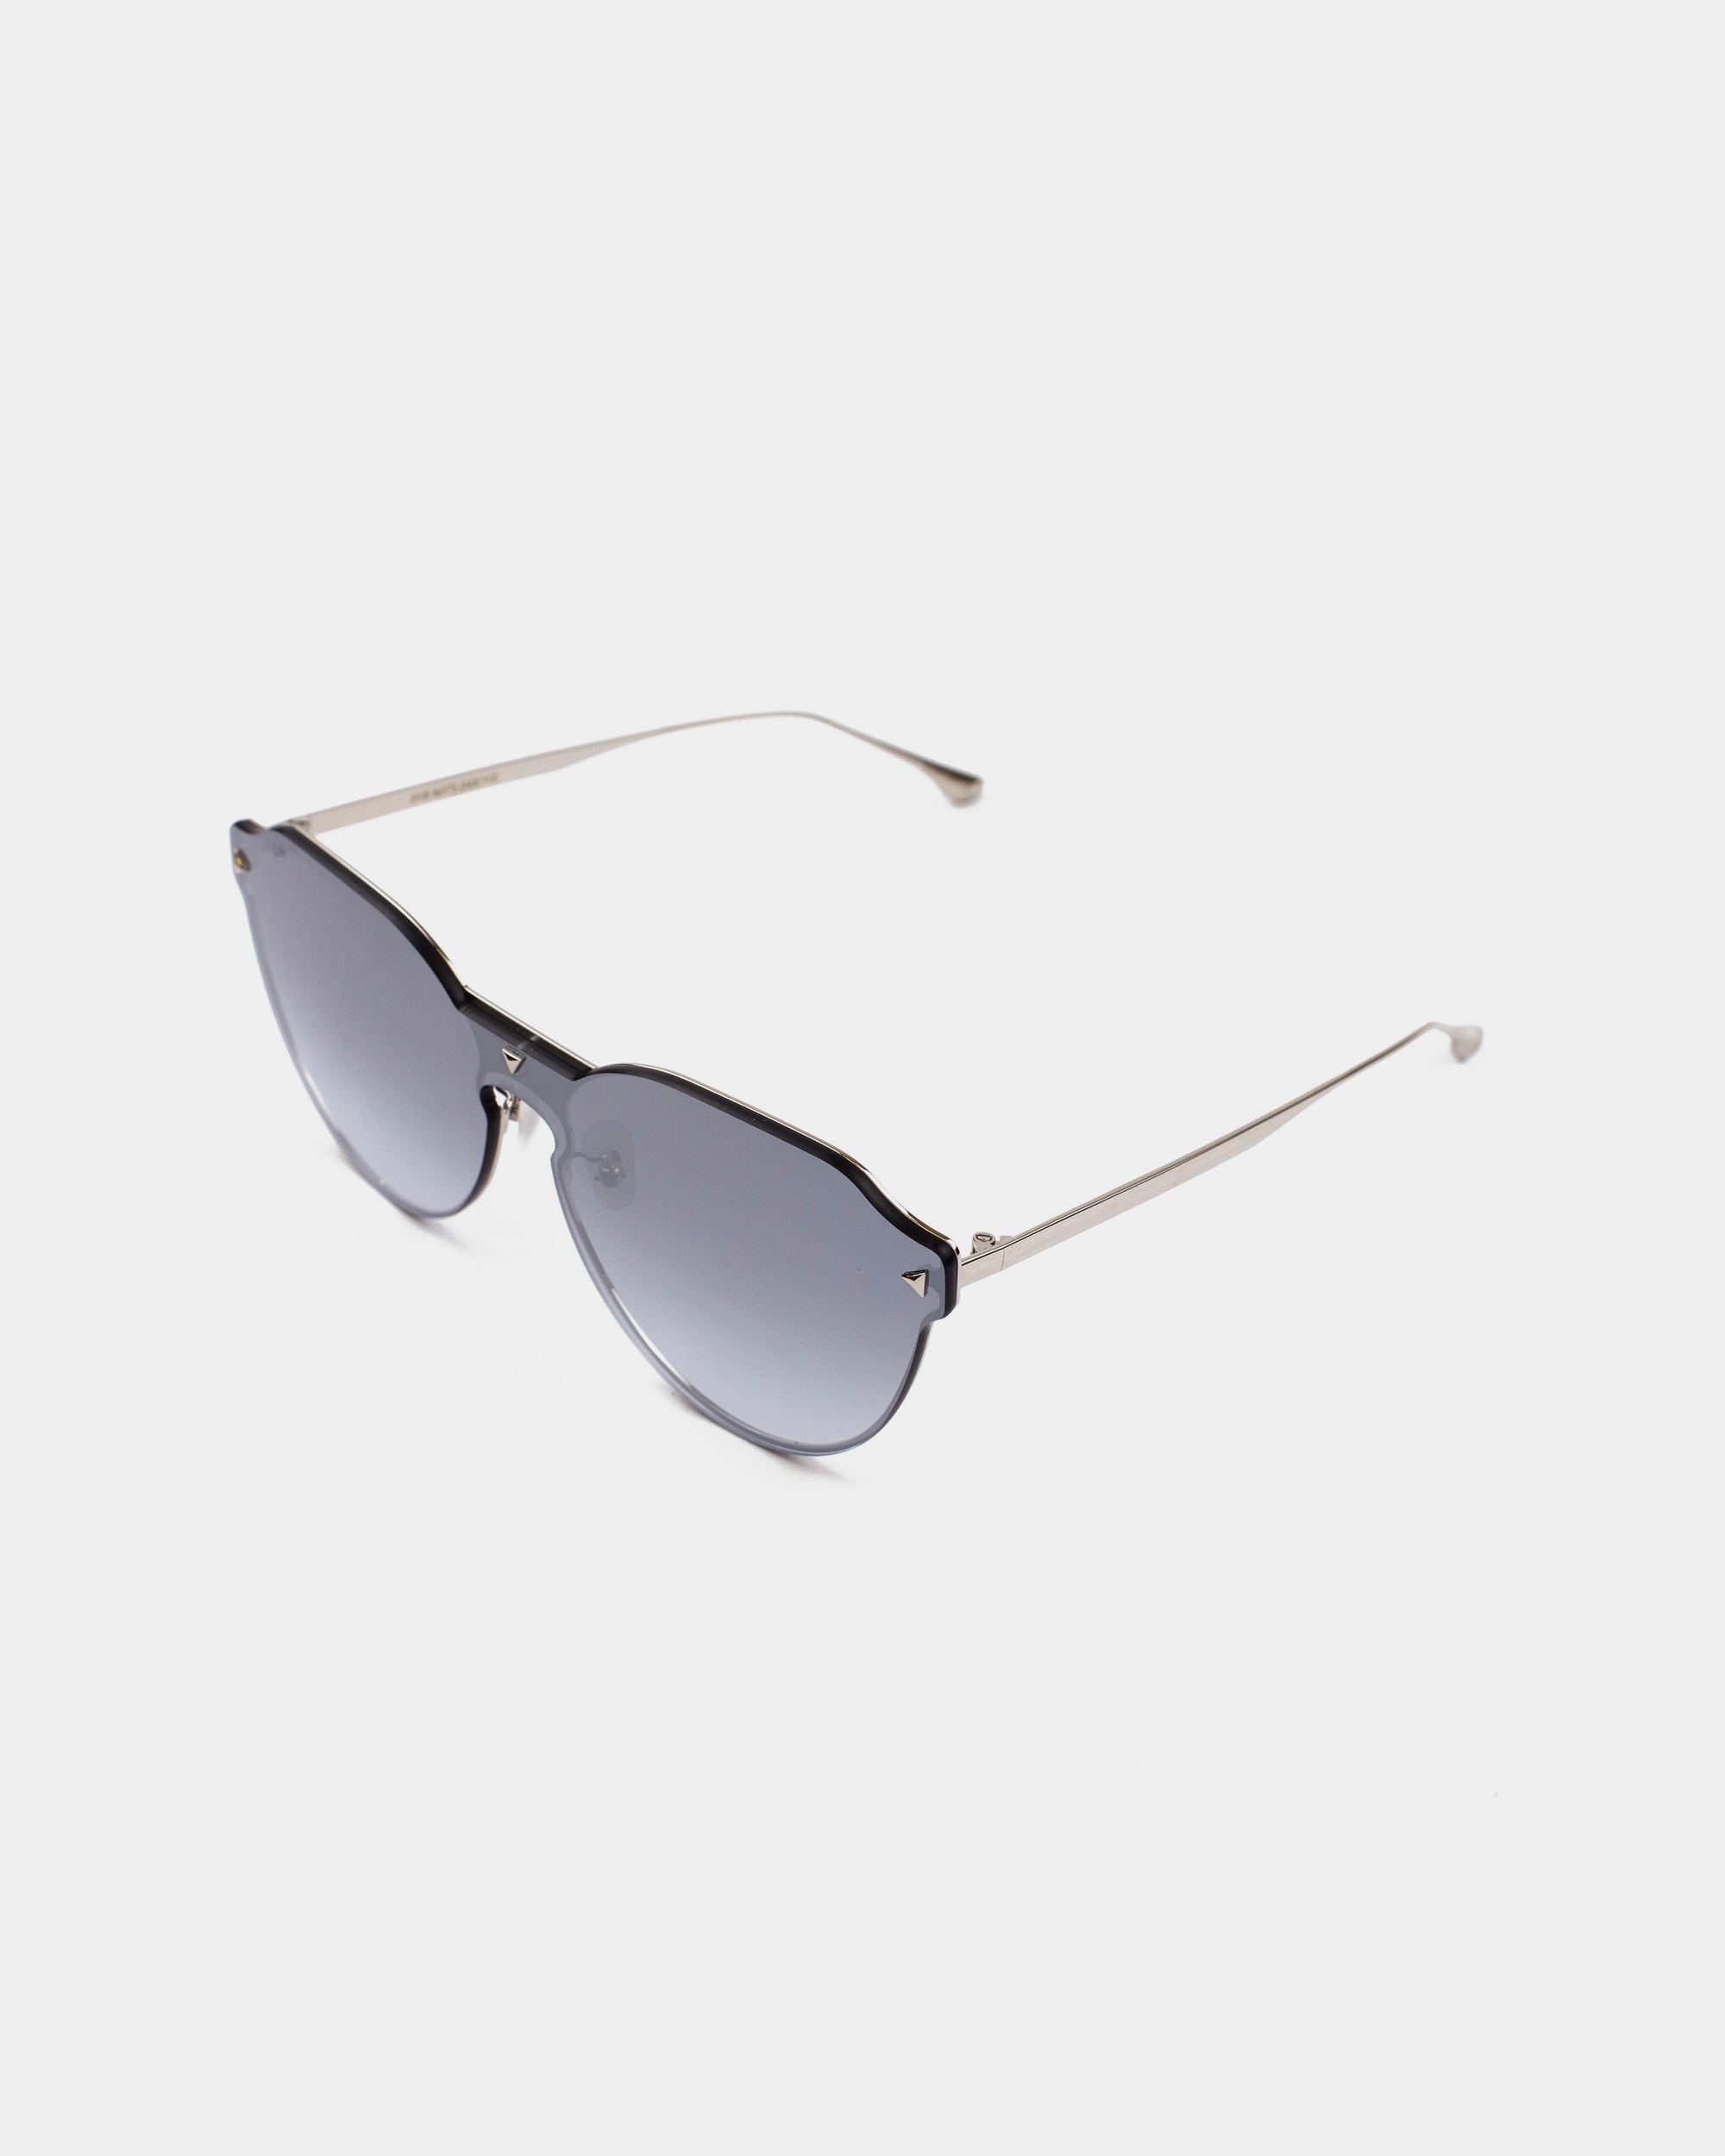 A pair of stylish For Art&#39;s Sake® Error 404 sunglasses with dark tinted hexagonal nylon lenses and thin metal arms. The frame around the lenses is minimalistic, with two small silver accents near the top corners and features UV protection. The background is plain white.